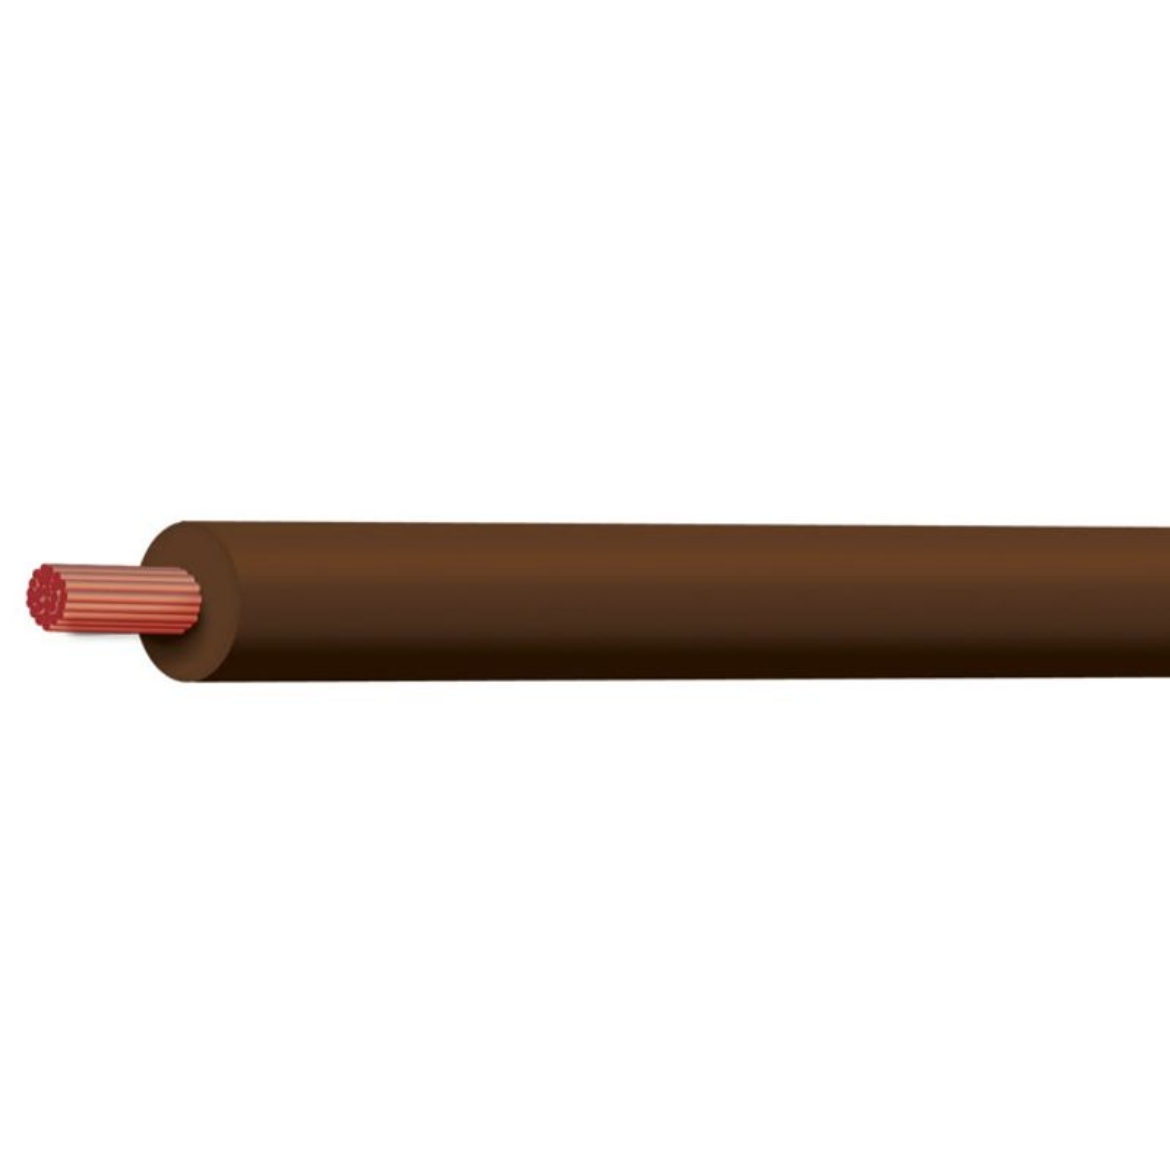 Picture of TYCAB 4MM SINGLE CORE CABLE 15A BROWN - 30M ROLL